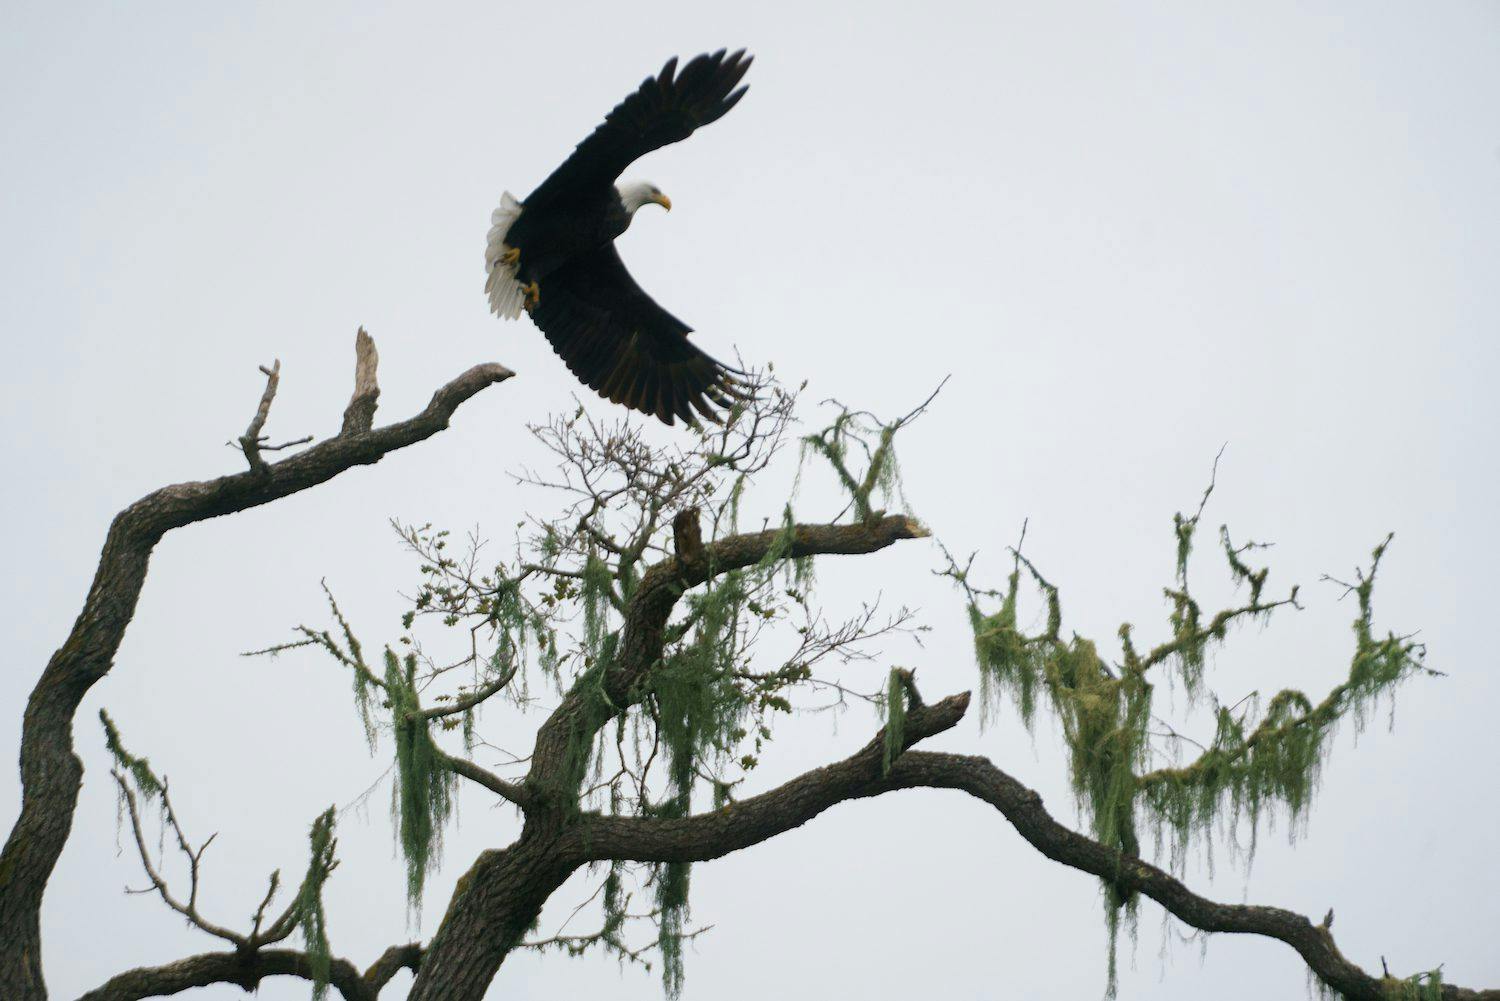 eagle getting ready to land on a branch